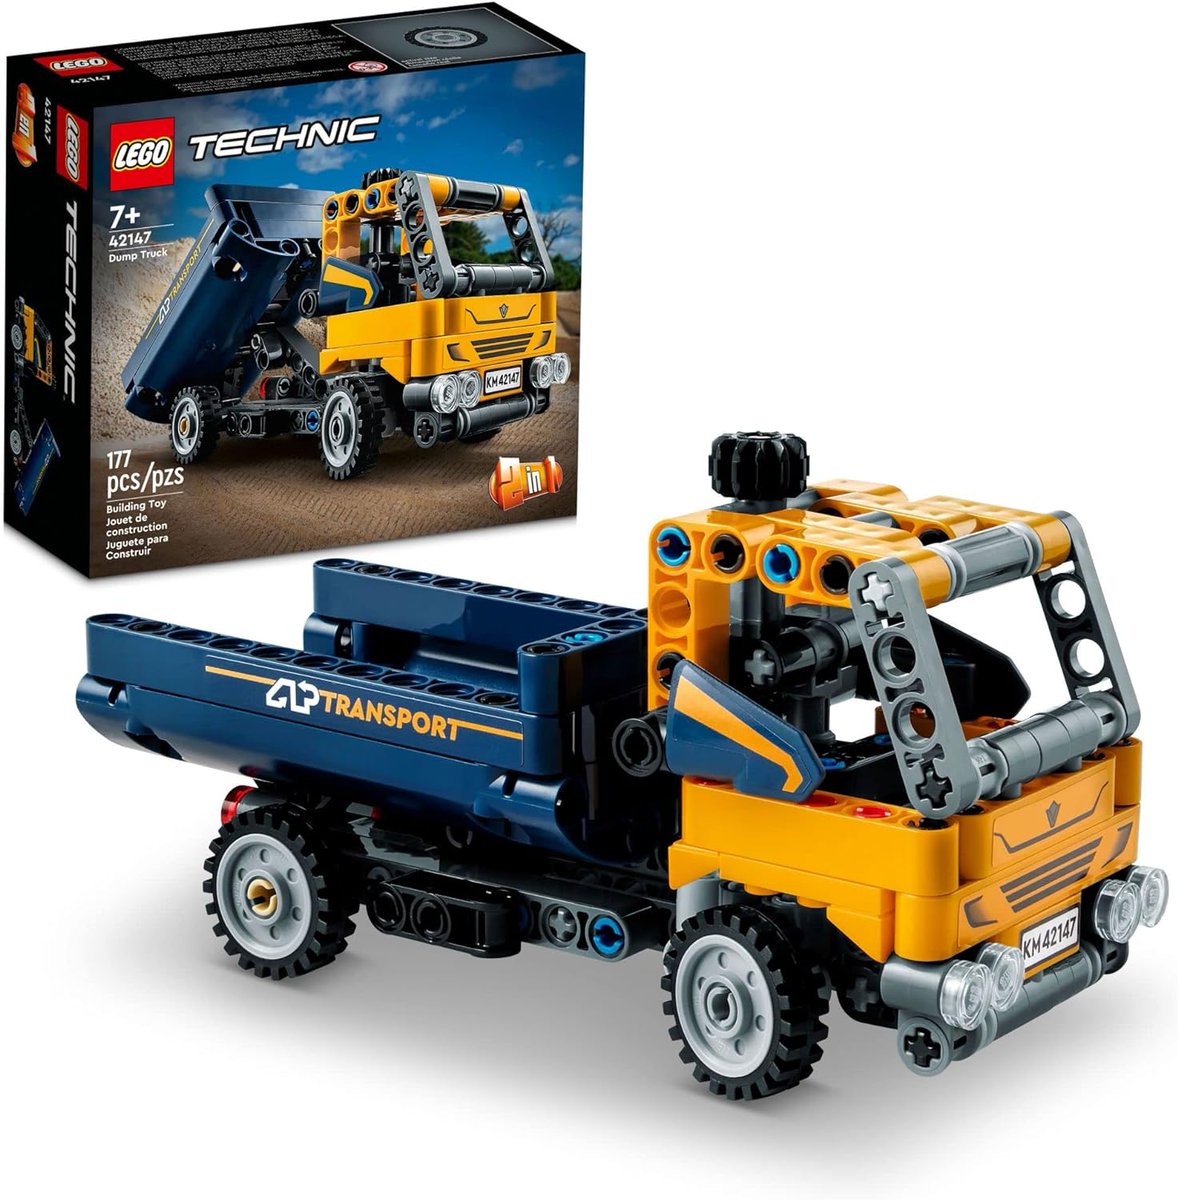 LEGO Technic Dump Truck 2-in-1 Set is $9.10 at Amazon after clipping the coupon zdcs.link/m3rjy